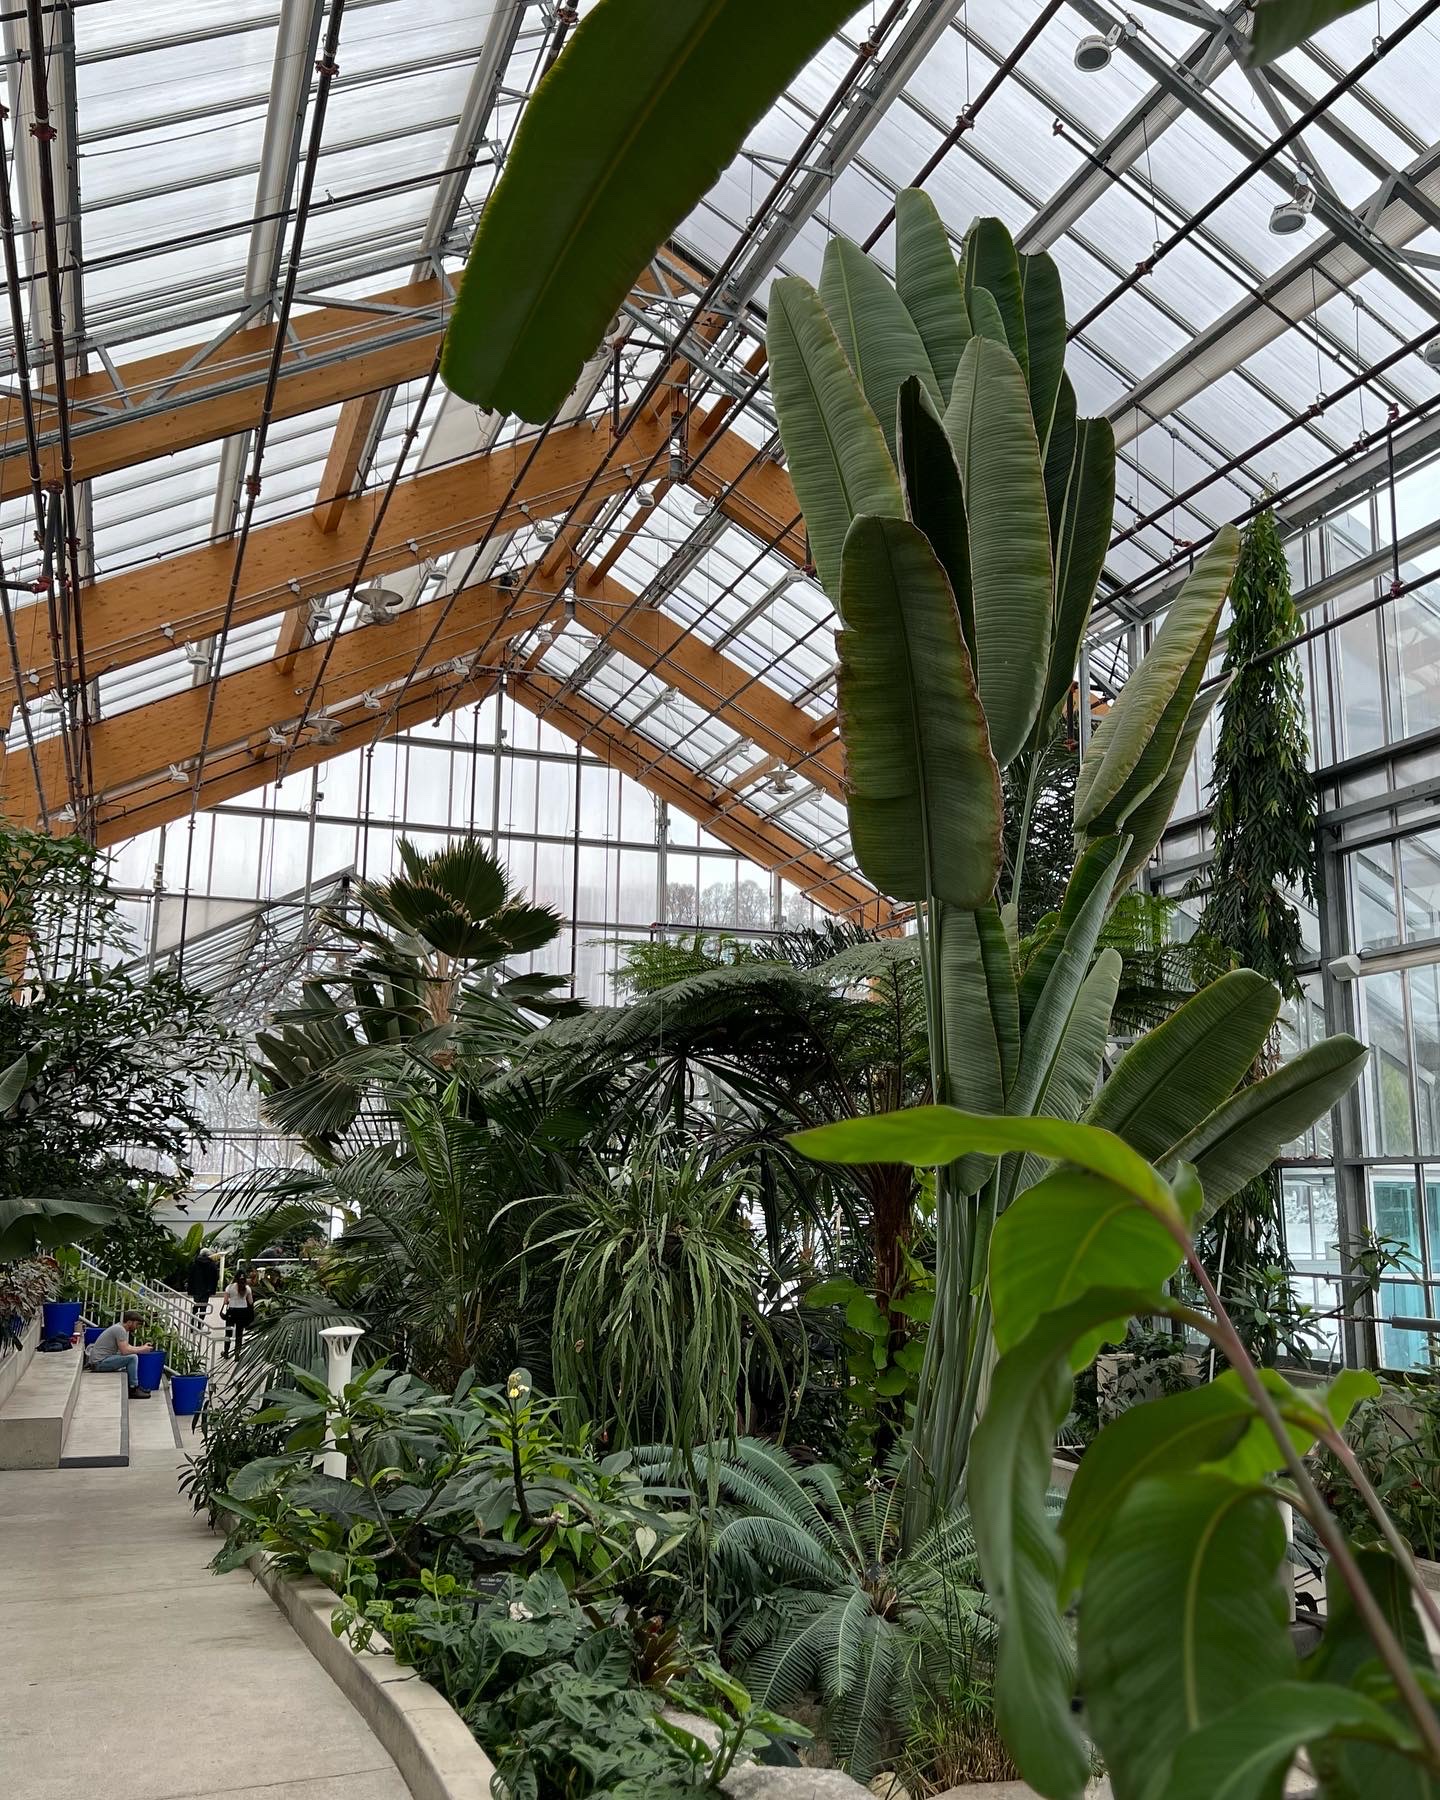 view down the length of Gage Park Tropical Greenhouse